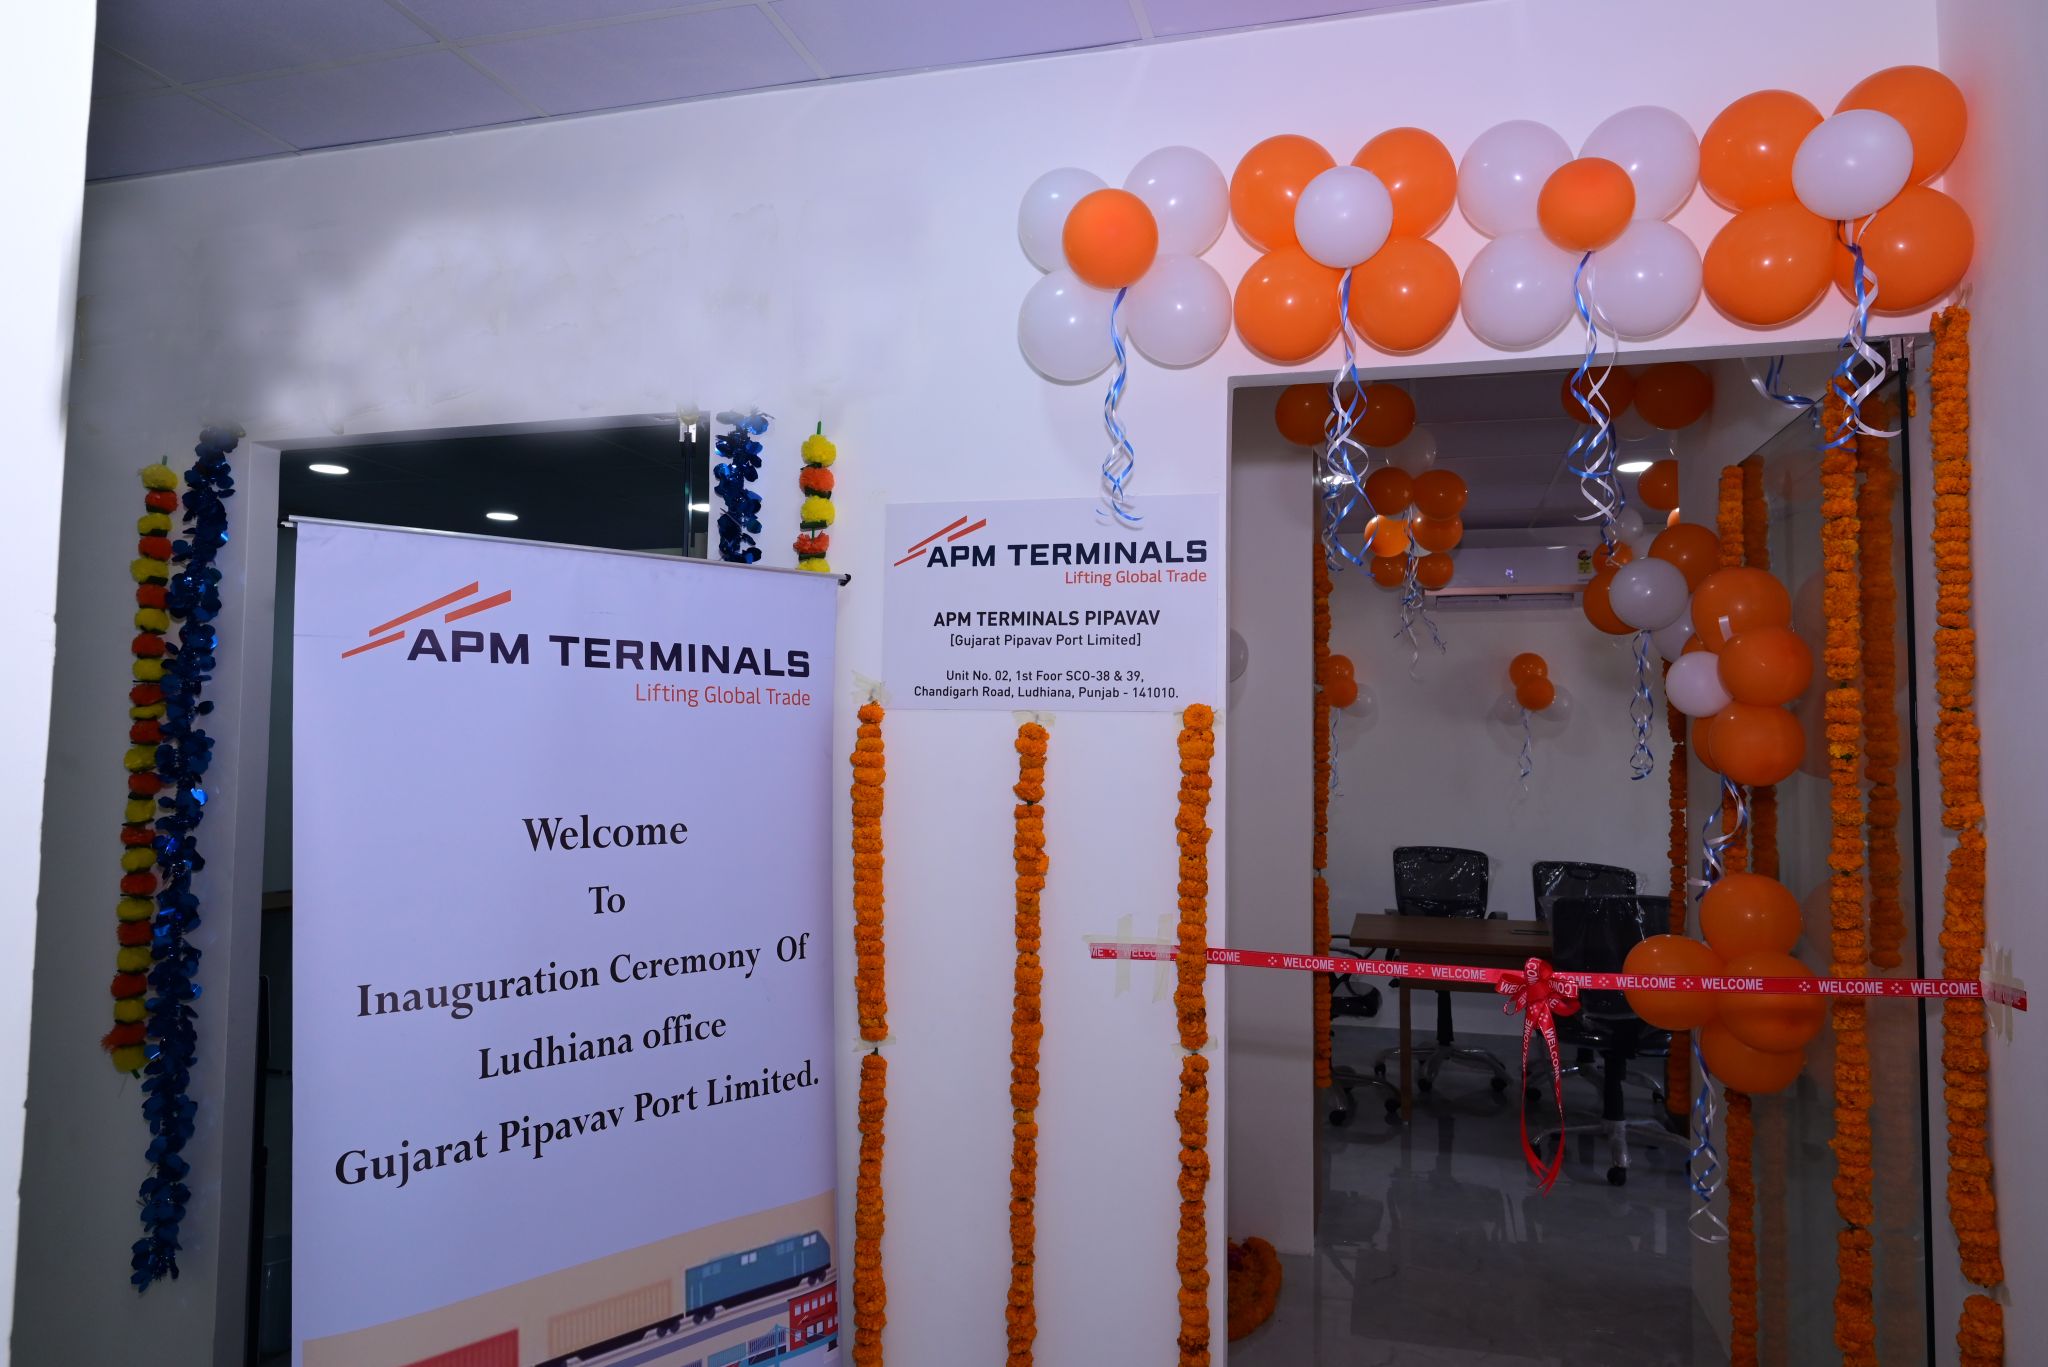 APM Terminals Pipavav Expands Northern Presence with Ludhiana Office Inauguration